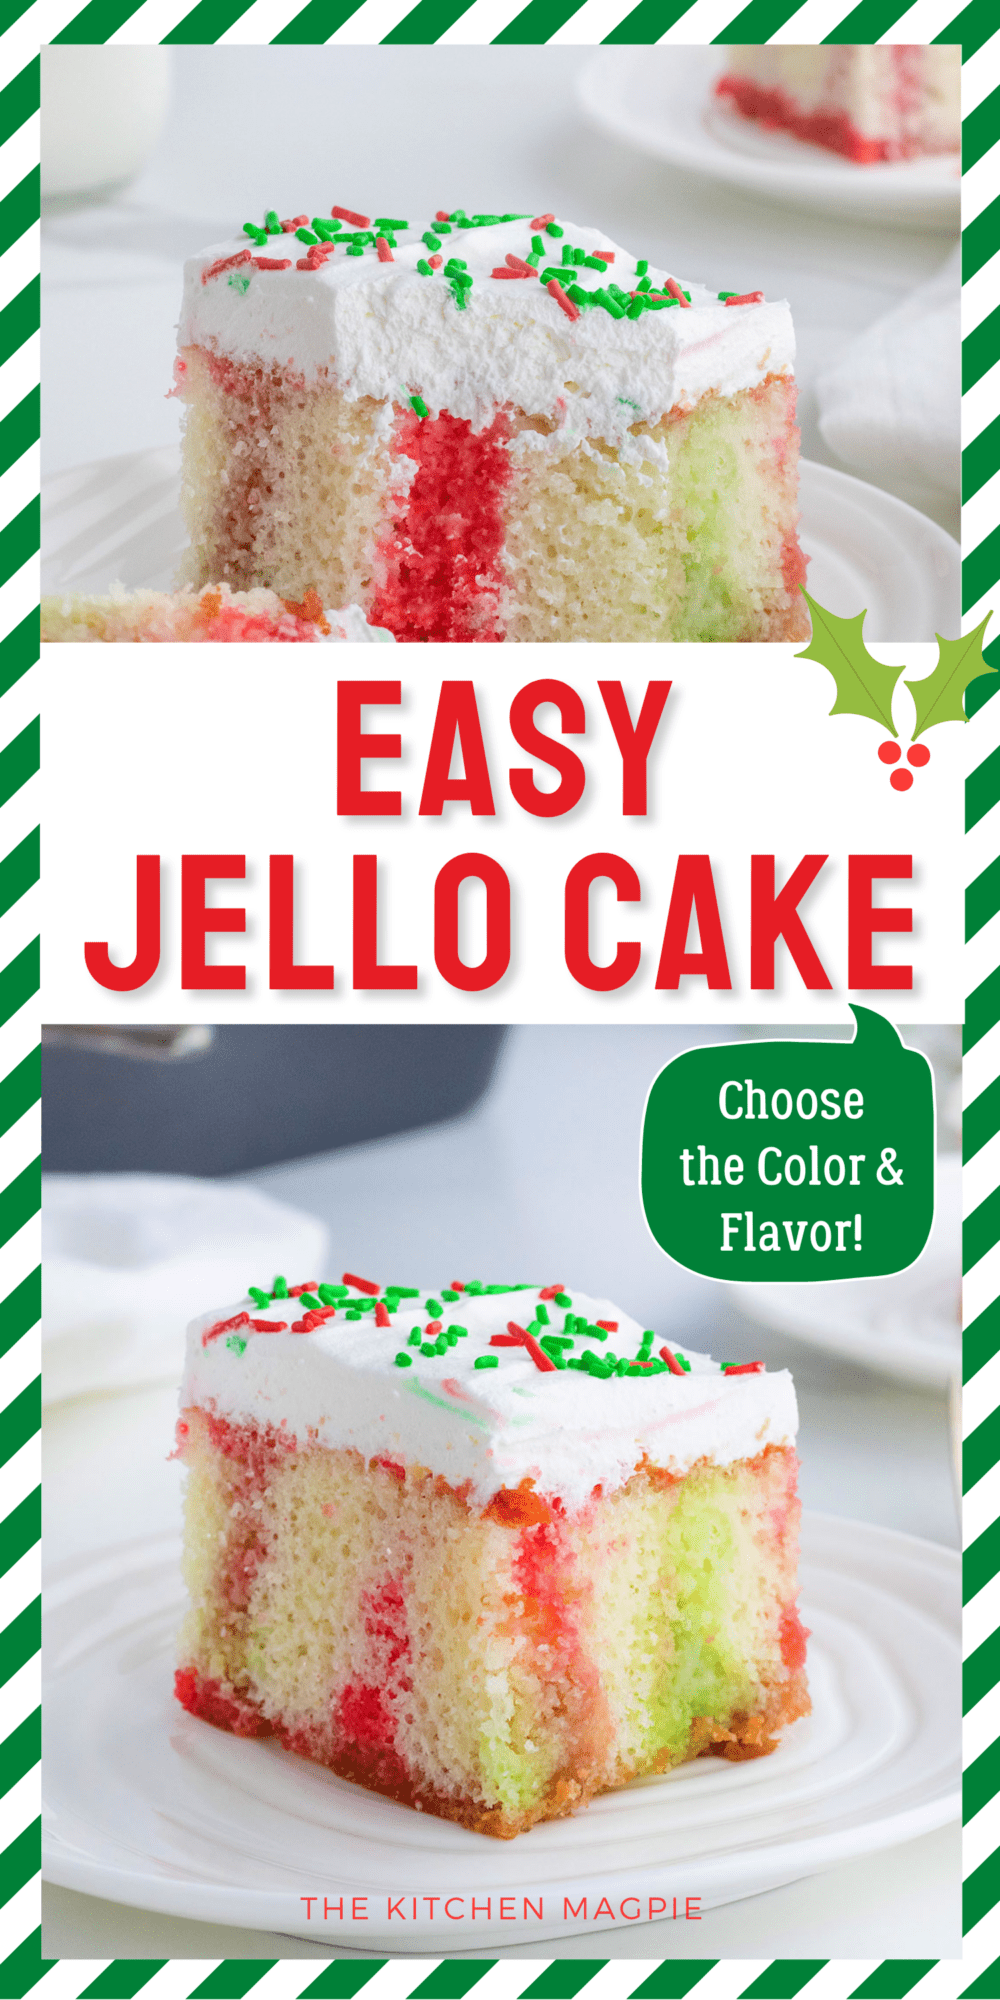 How to make Jello poke cake! This colorful cake uses cake mix and two different types of Jello mix for a delicious and beautiful cake!